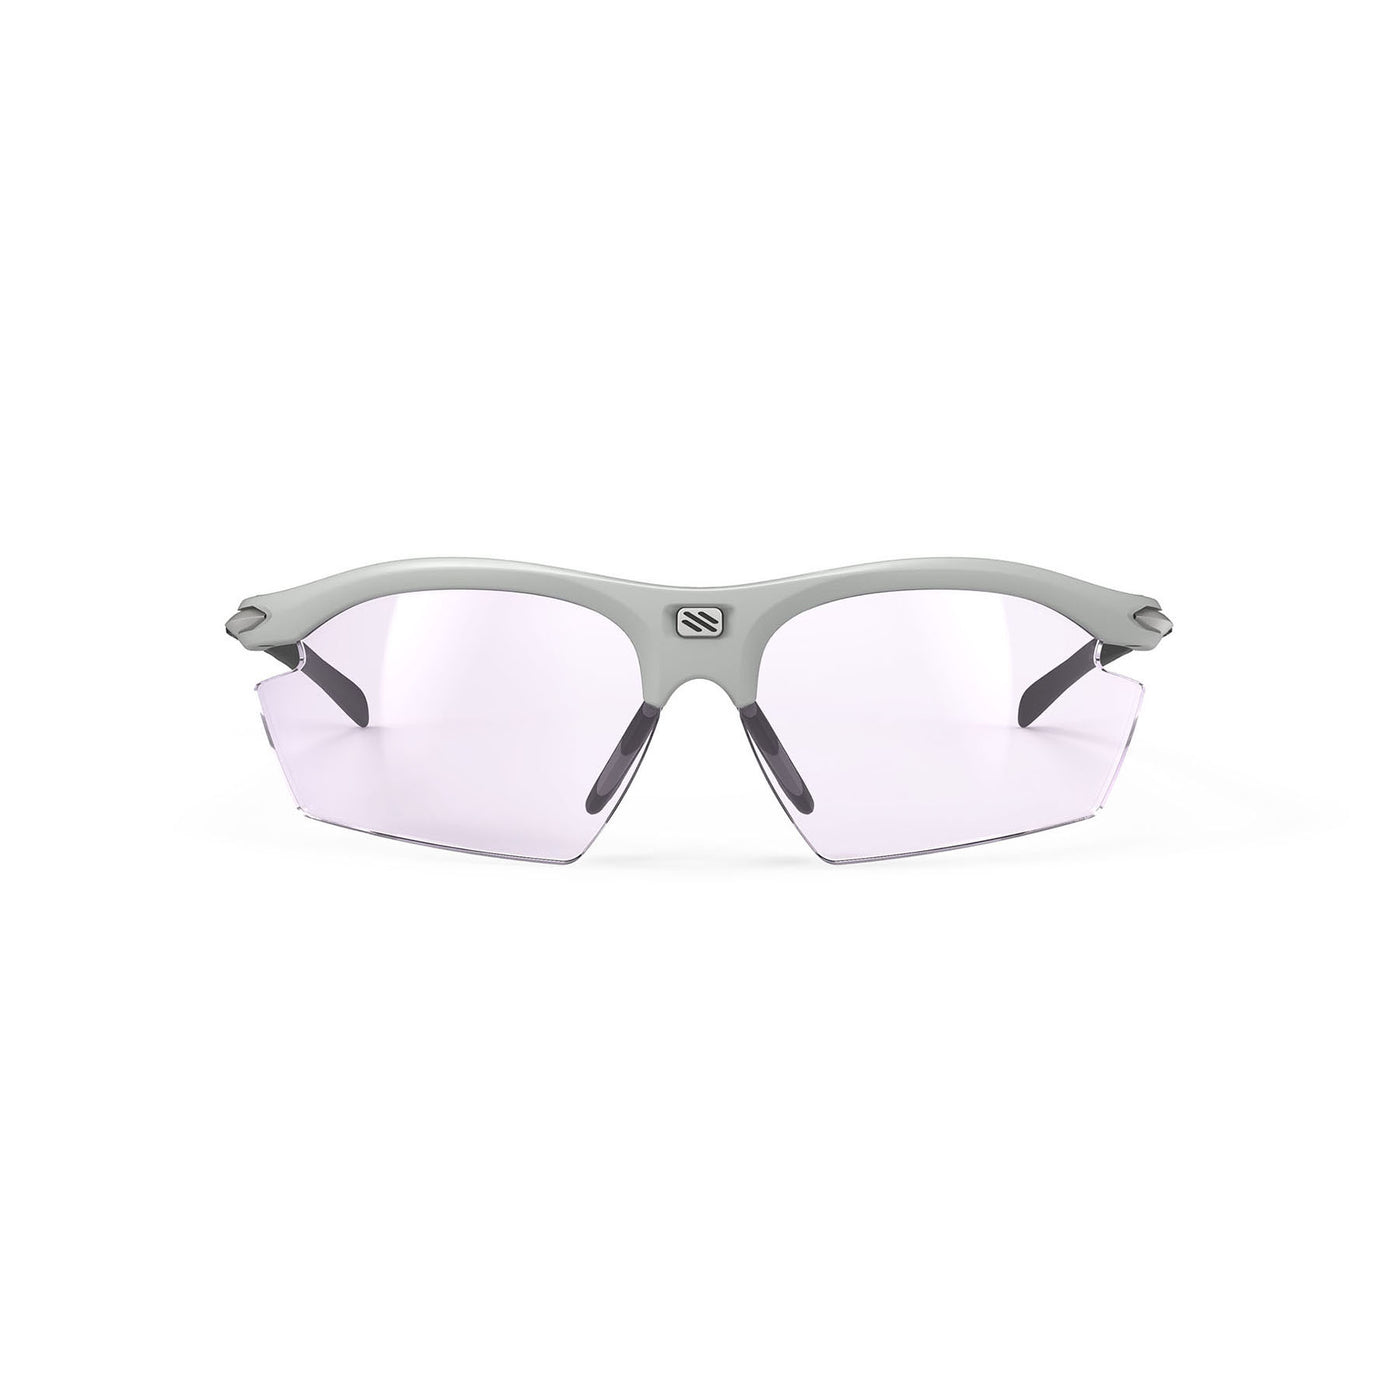 Rudy Project prescription ready running and cycling sunglasses#color_rydon-light-grey-matte-frame-and-impactx-photochromic-2-laser-purple-lenses